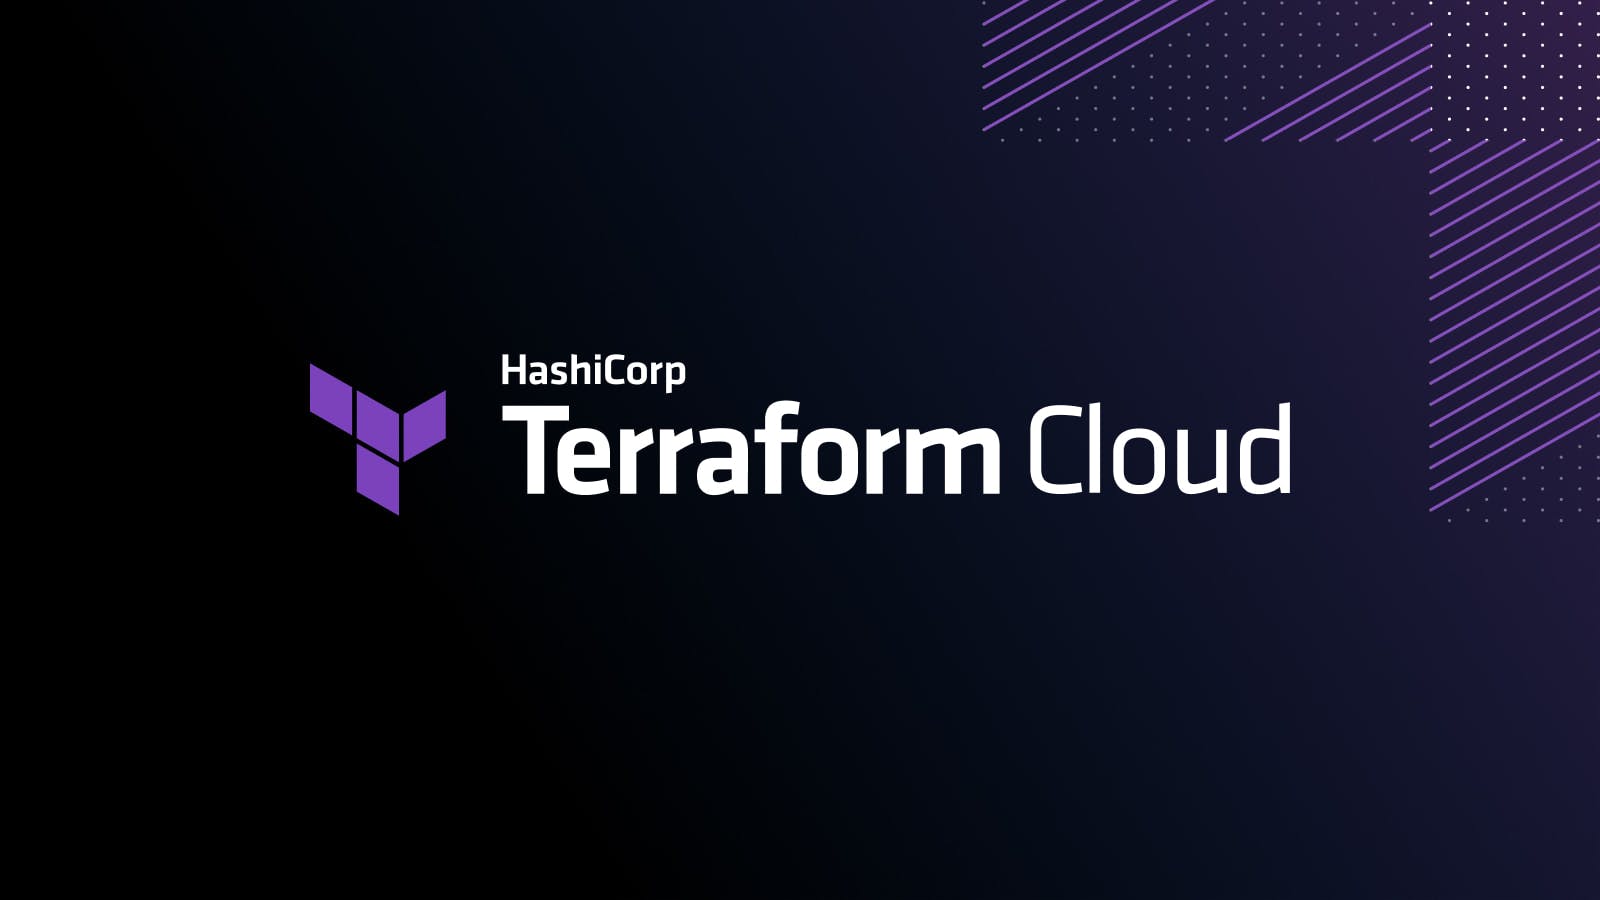 8 Terraform continuous validation use cases for AWS, Google Cloud, and Azure